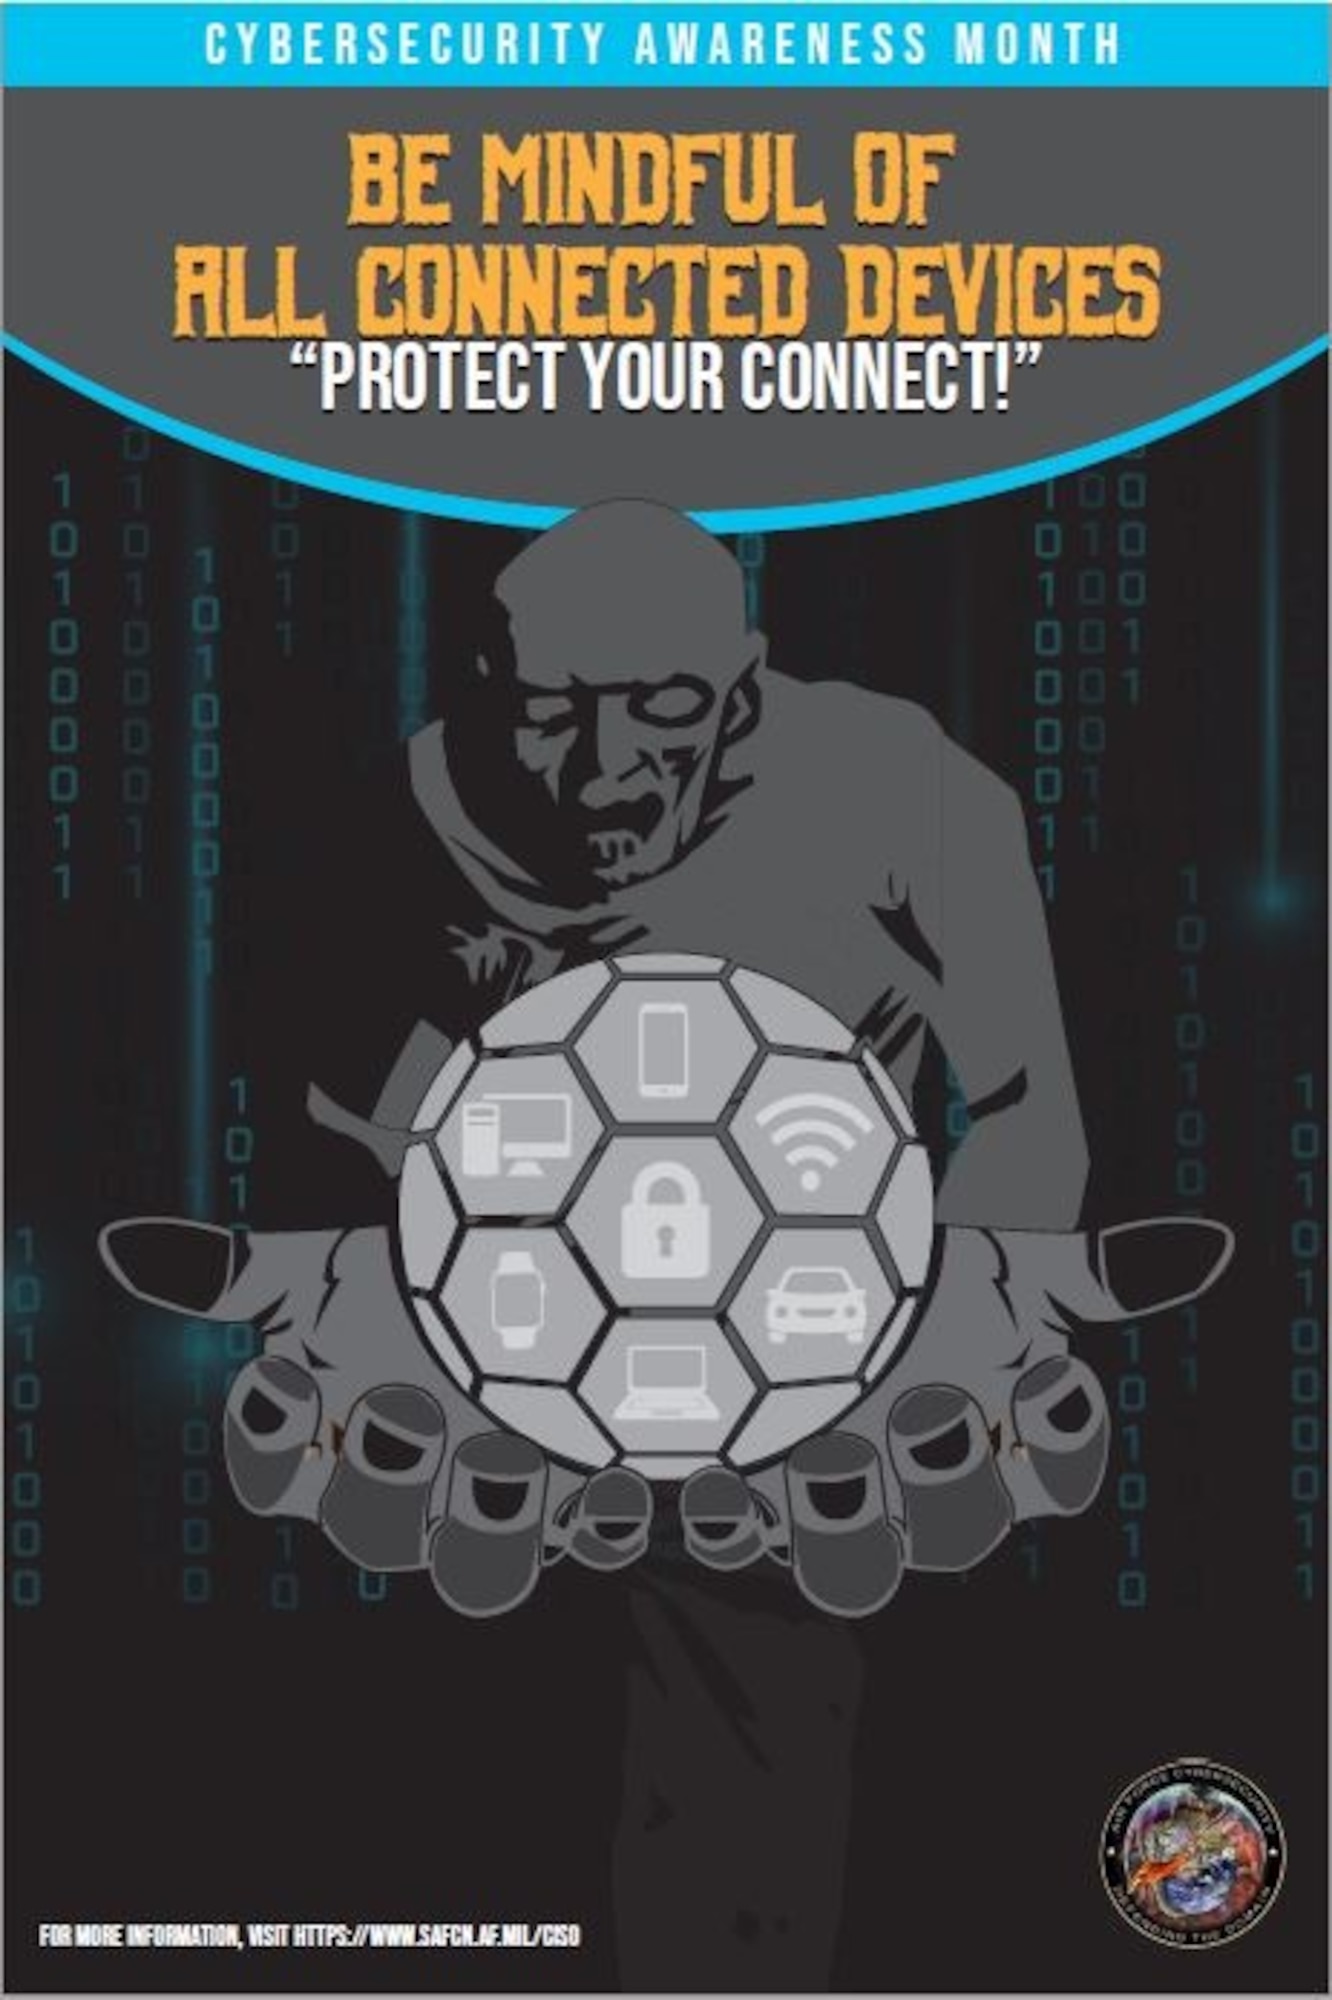 Unicon Pledges to Support National Cybersecurity Awareness Month